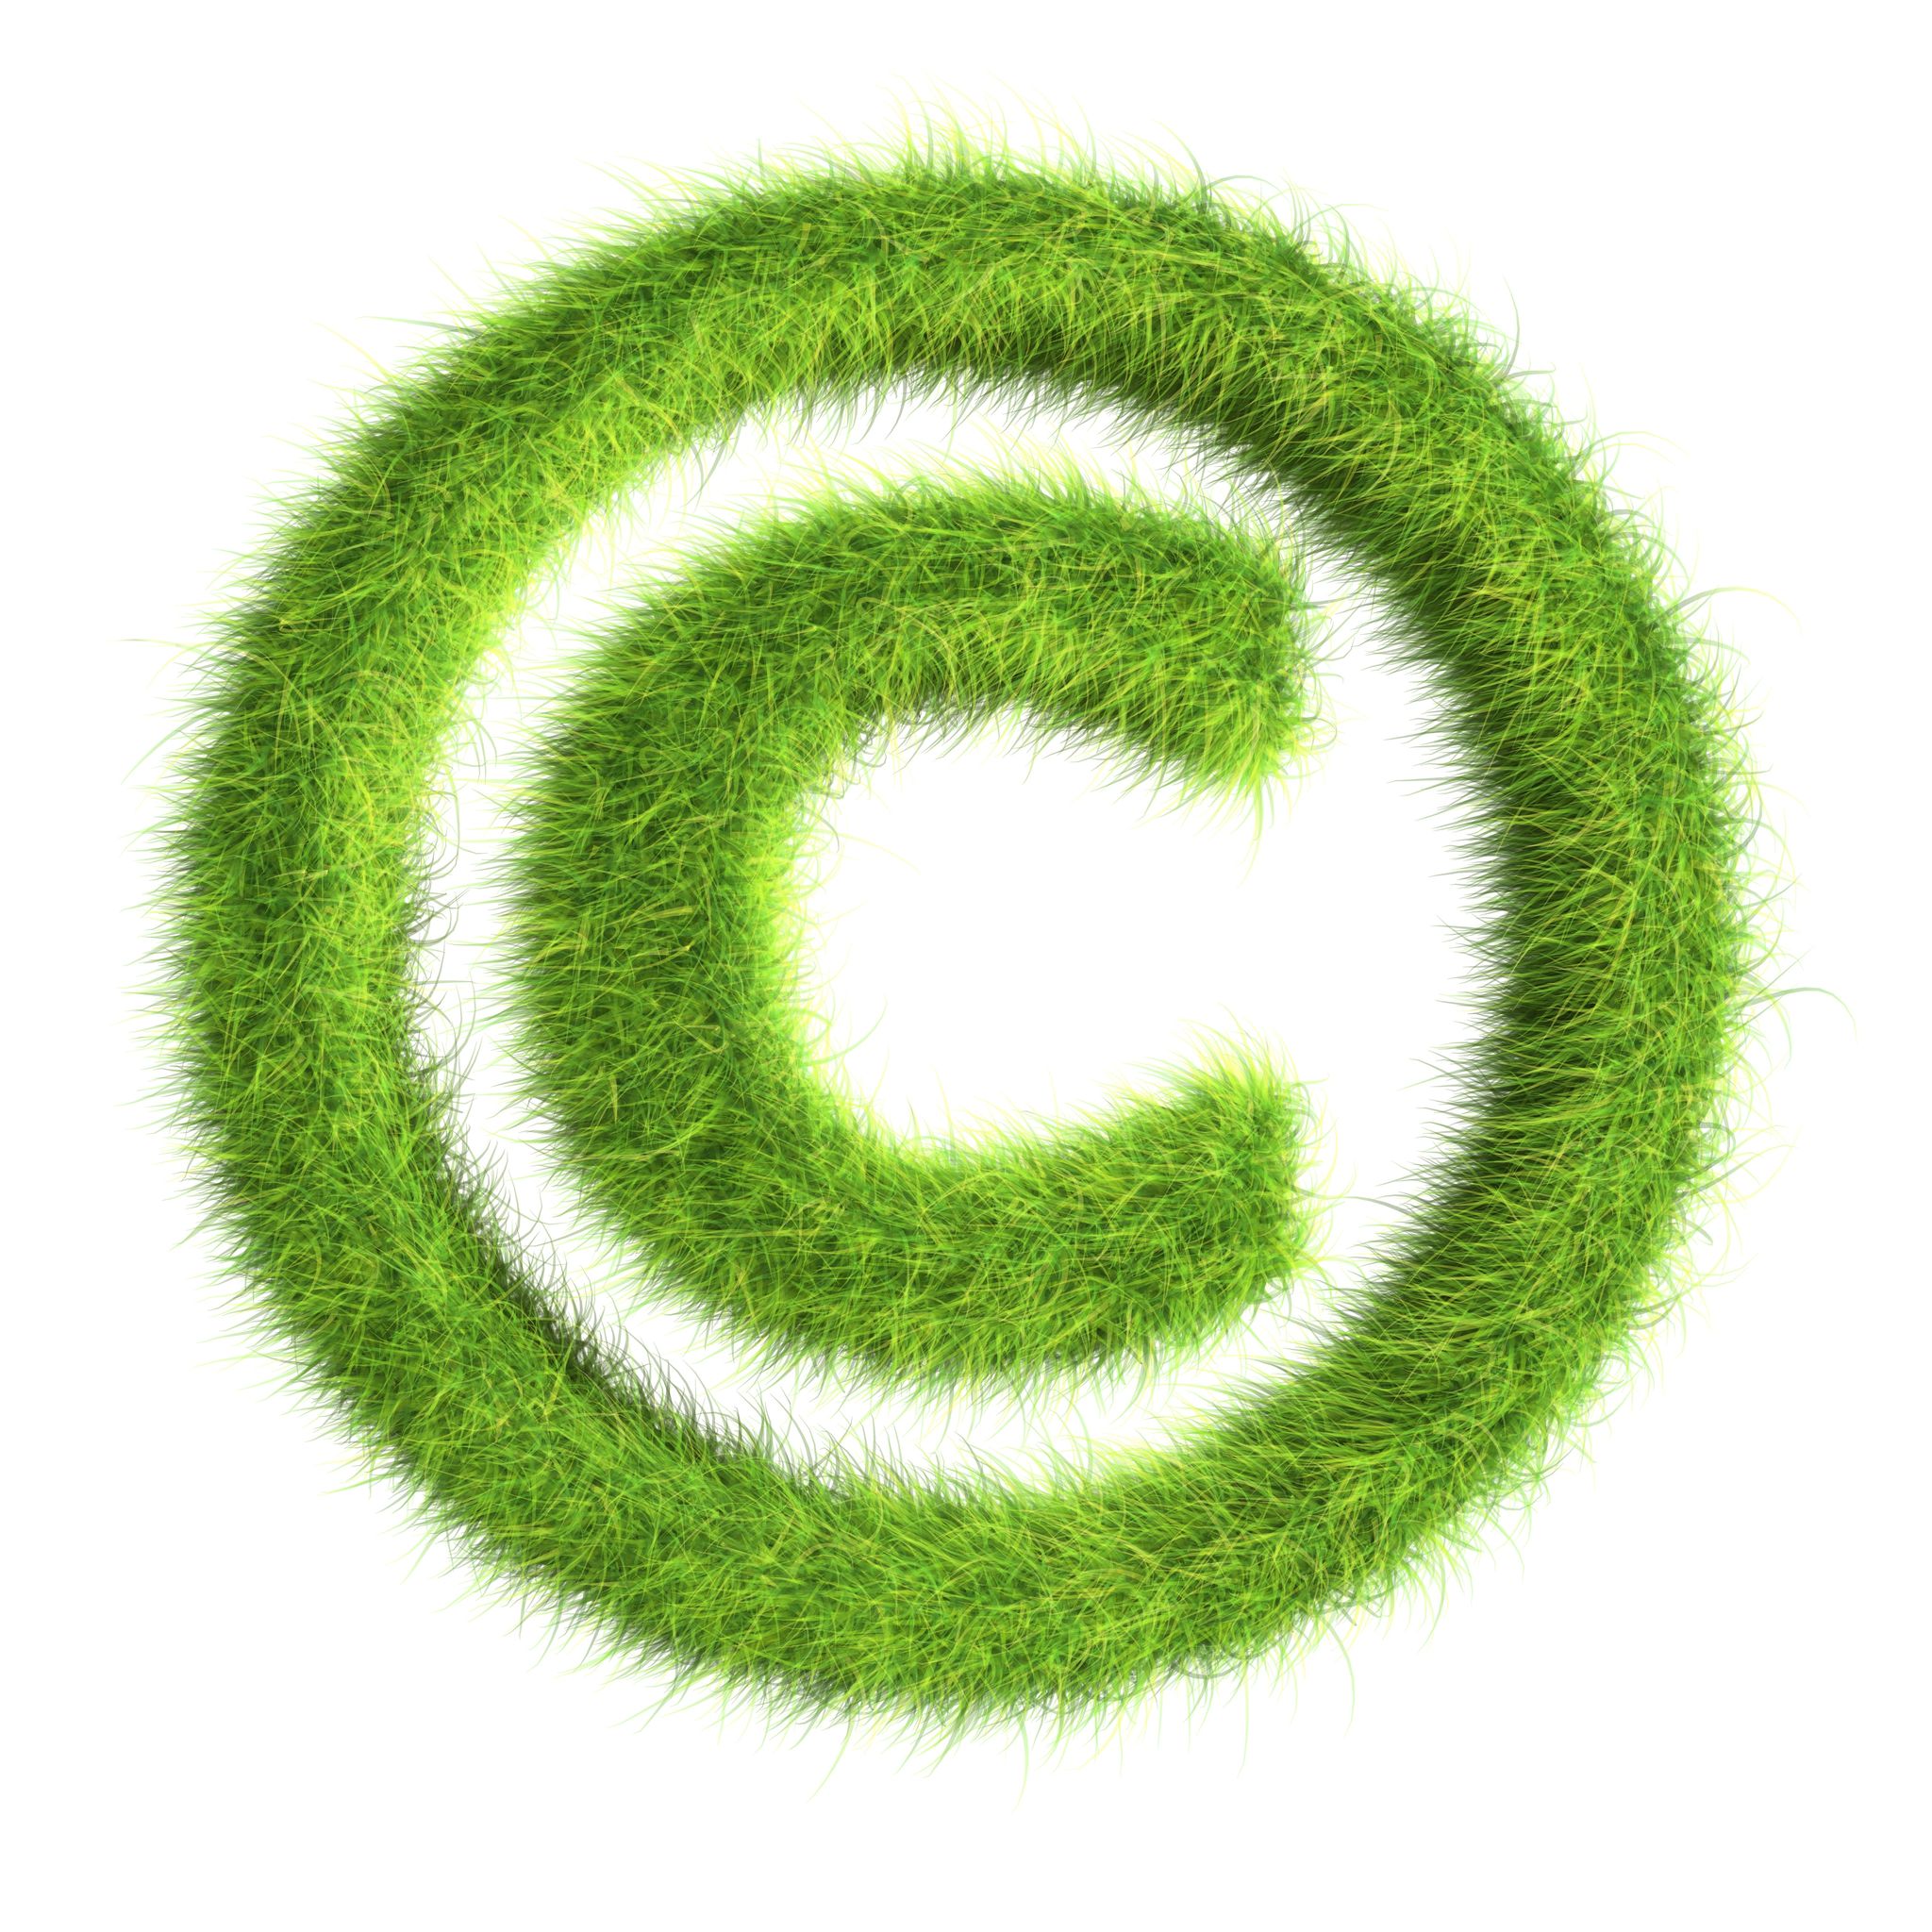 copyright y creative commons,